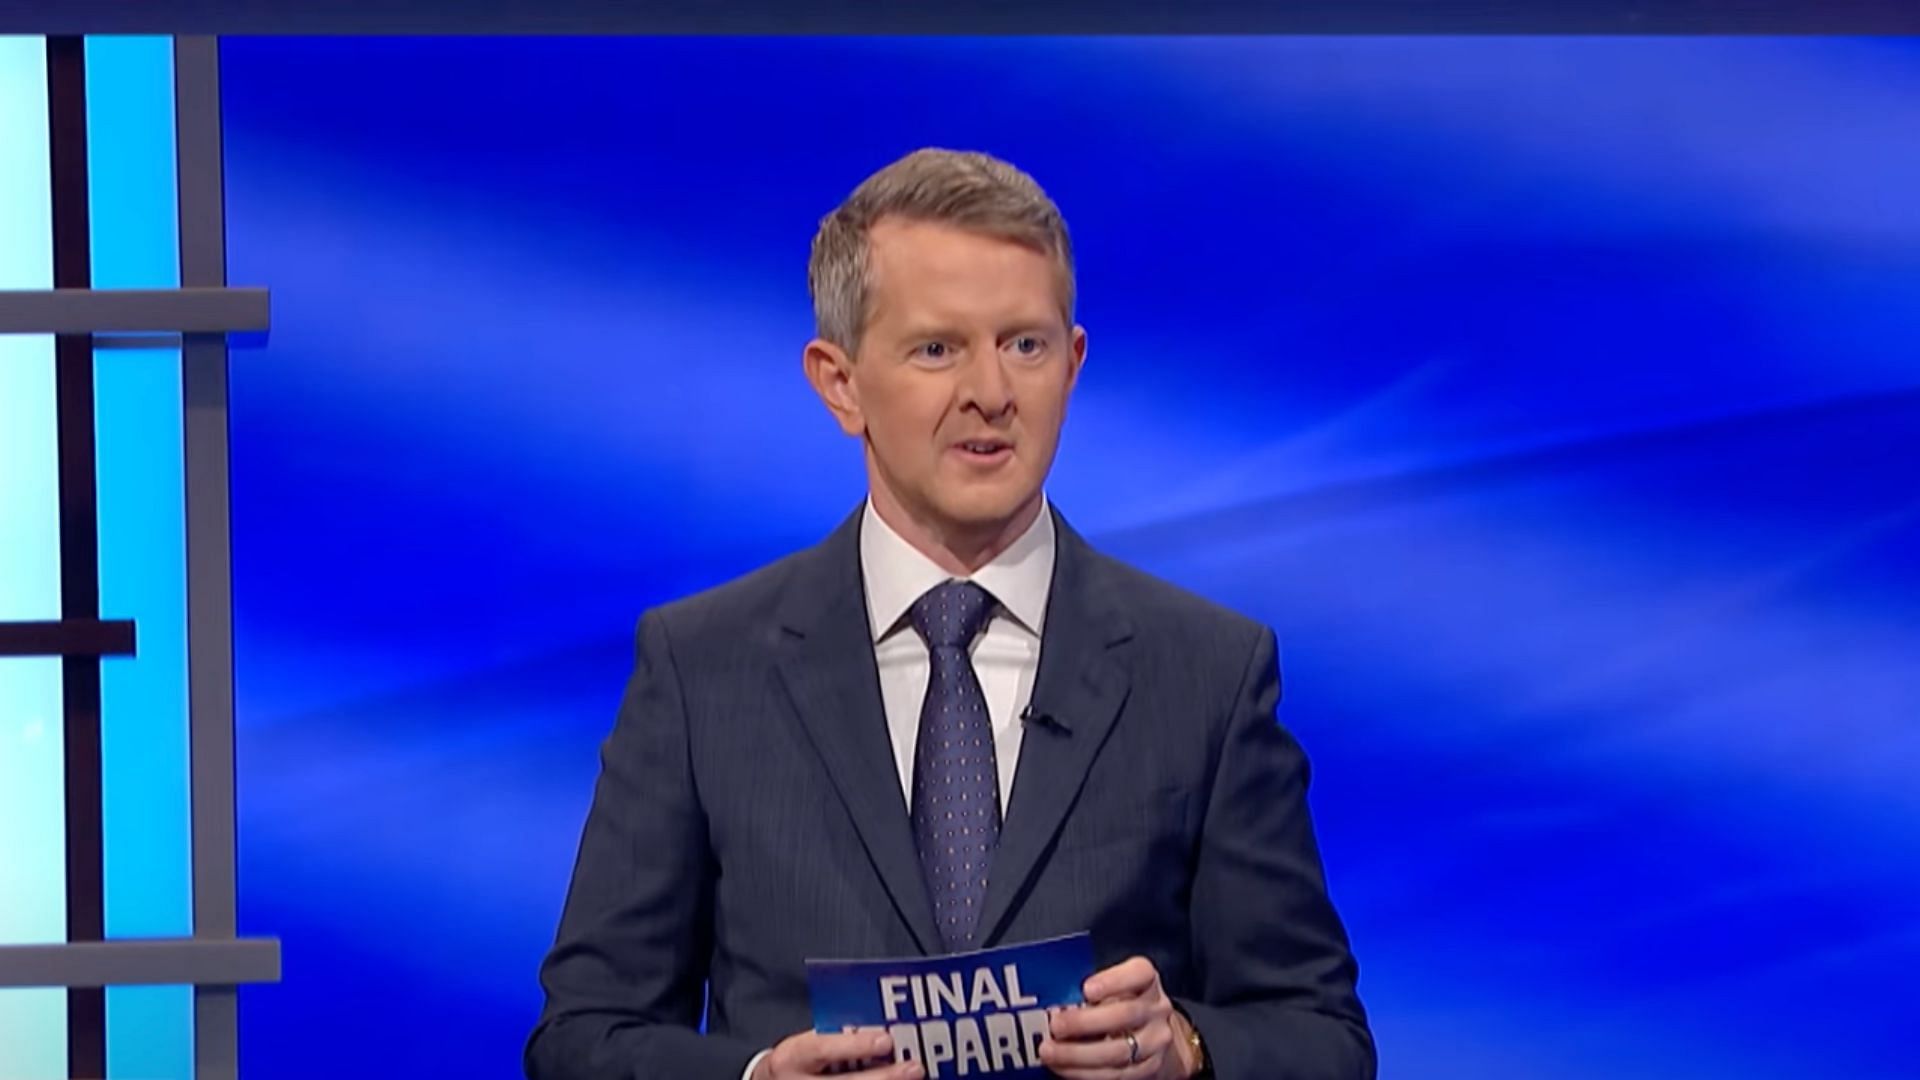 The latest episode was hosted by Ken Jennings